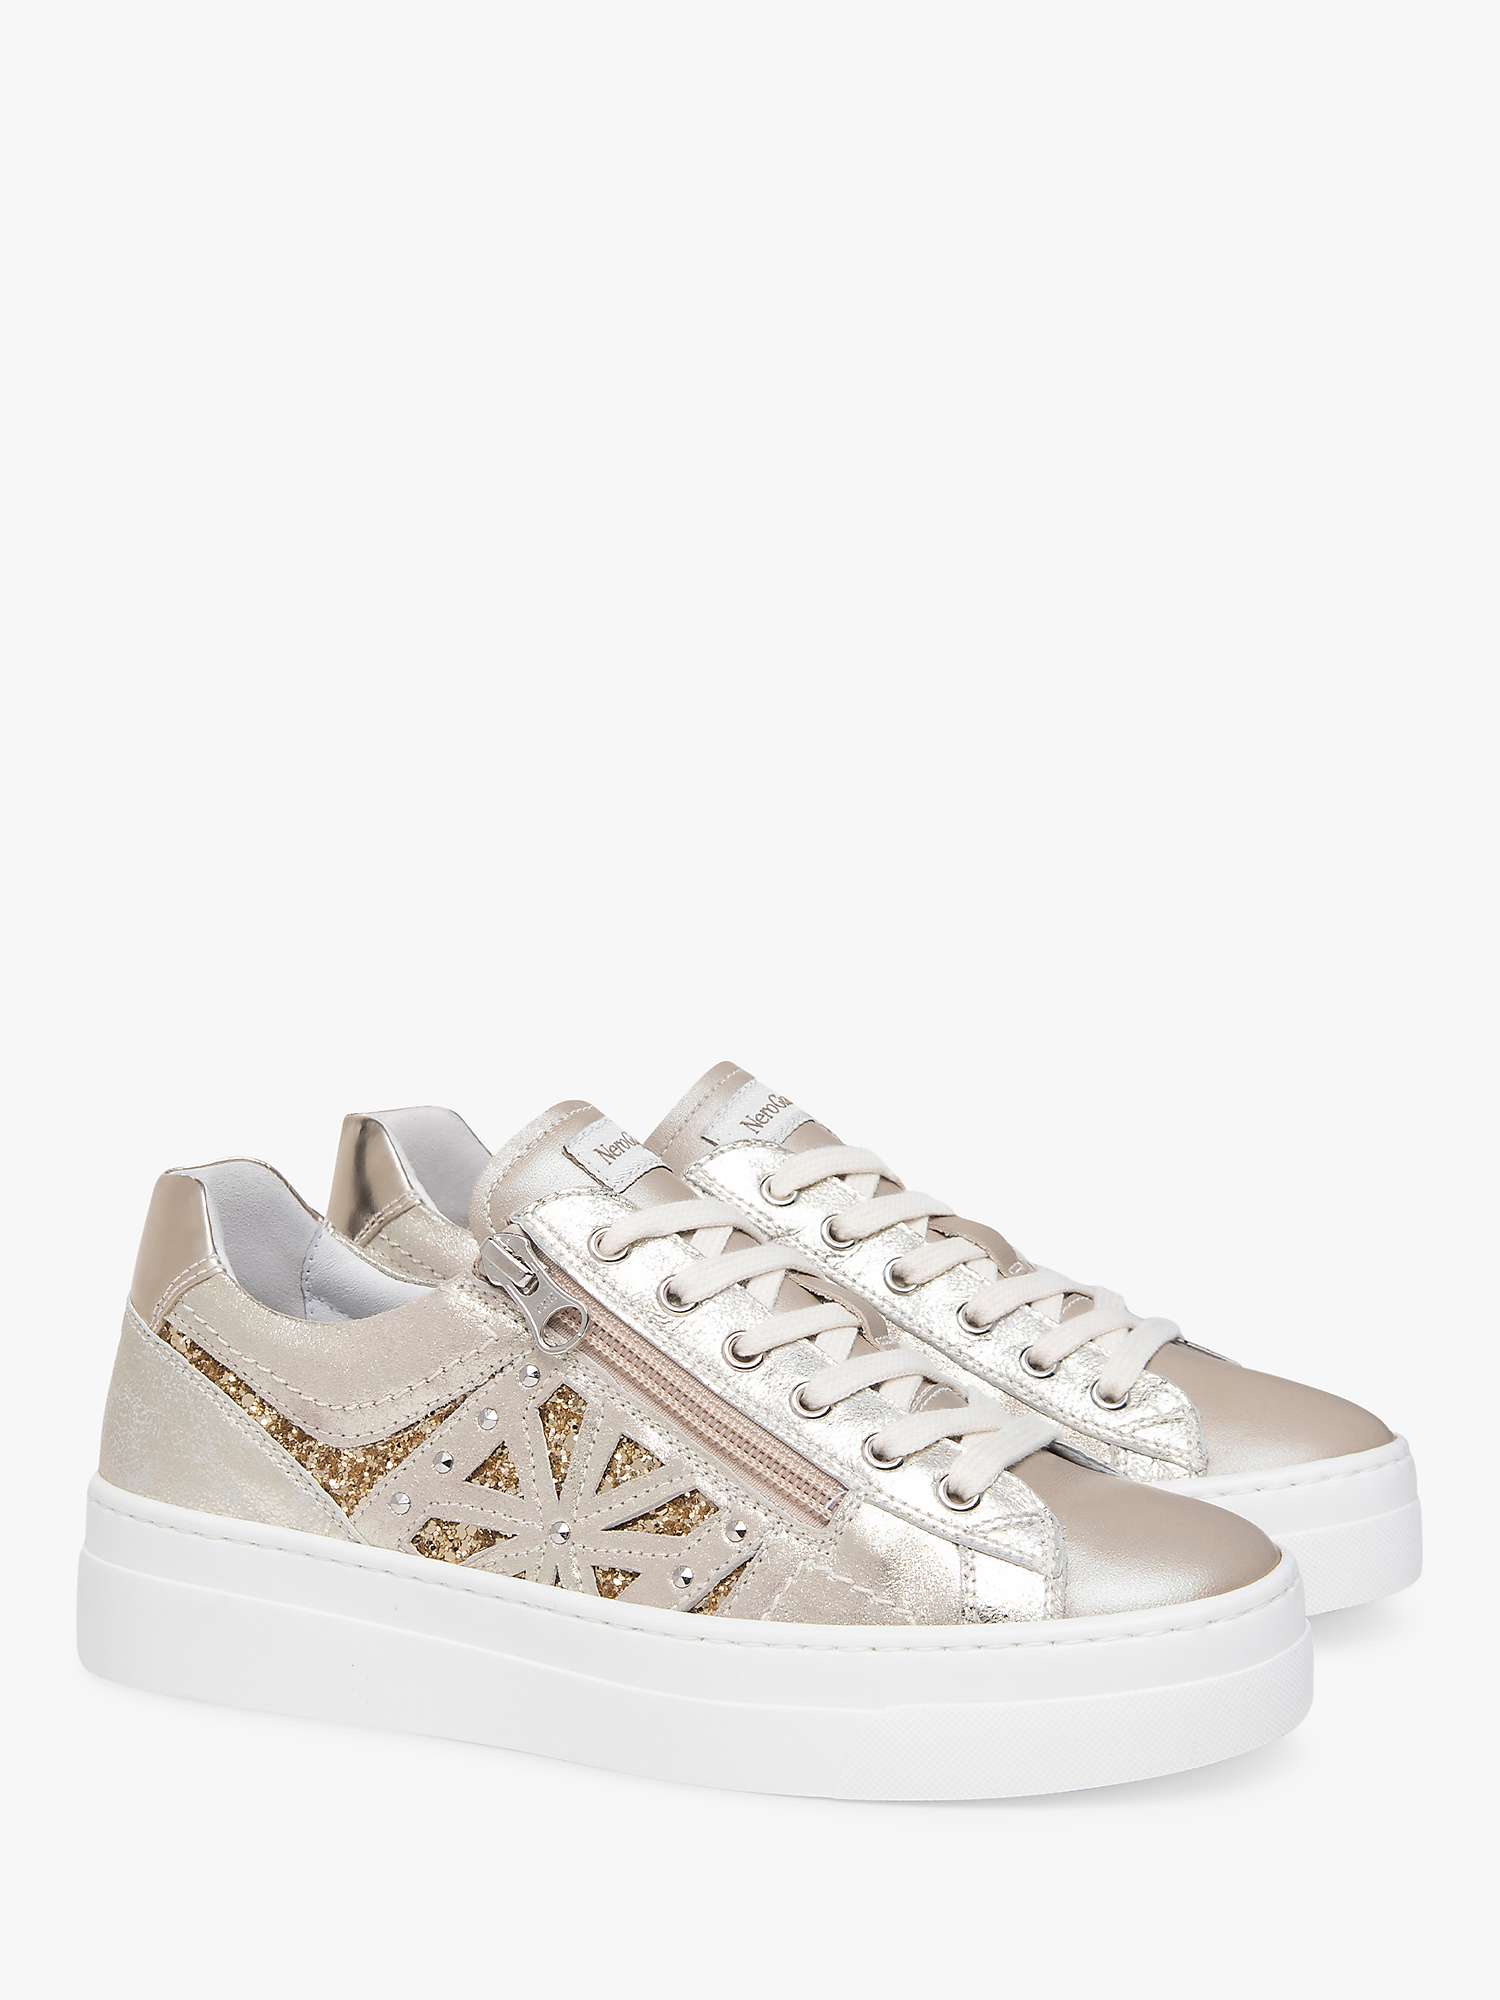 Buy NeroGiardini Low Top Leather Trainers Online at johnlewis.com